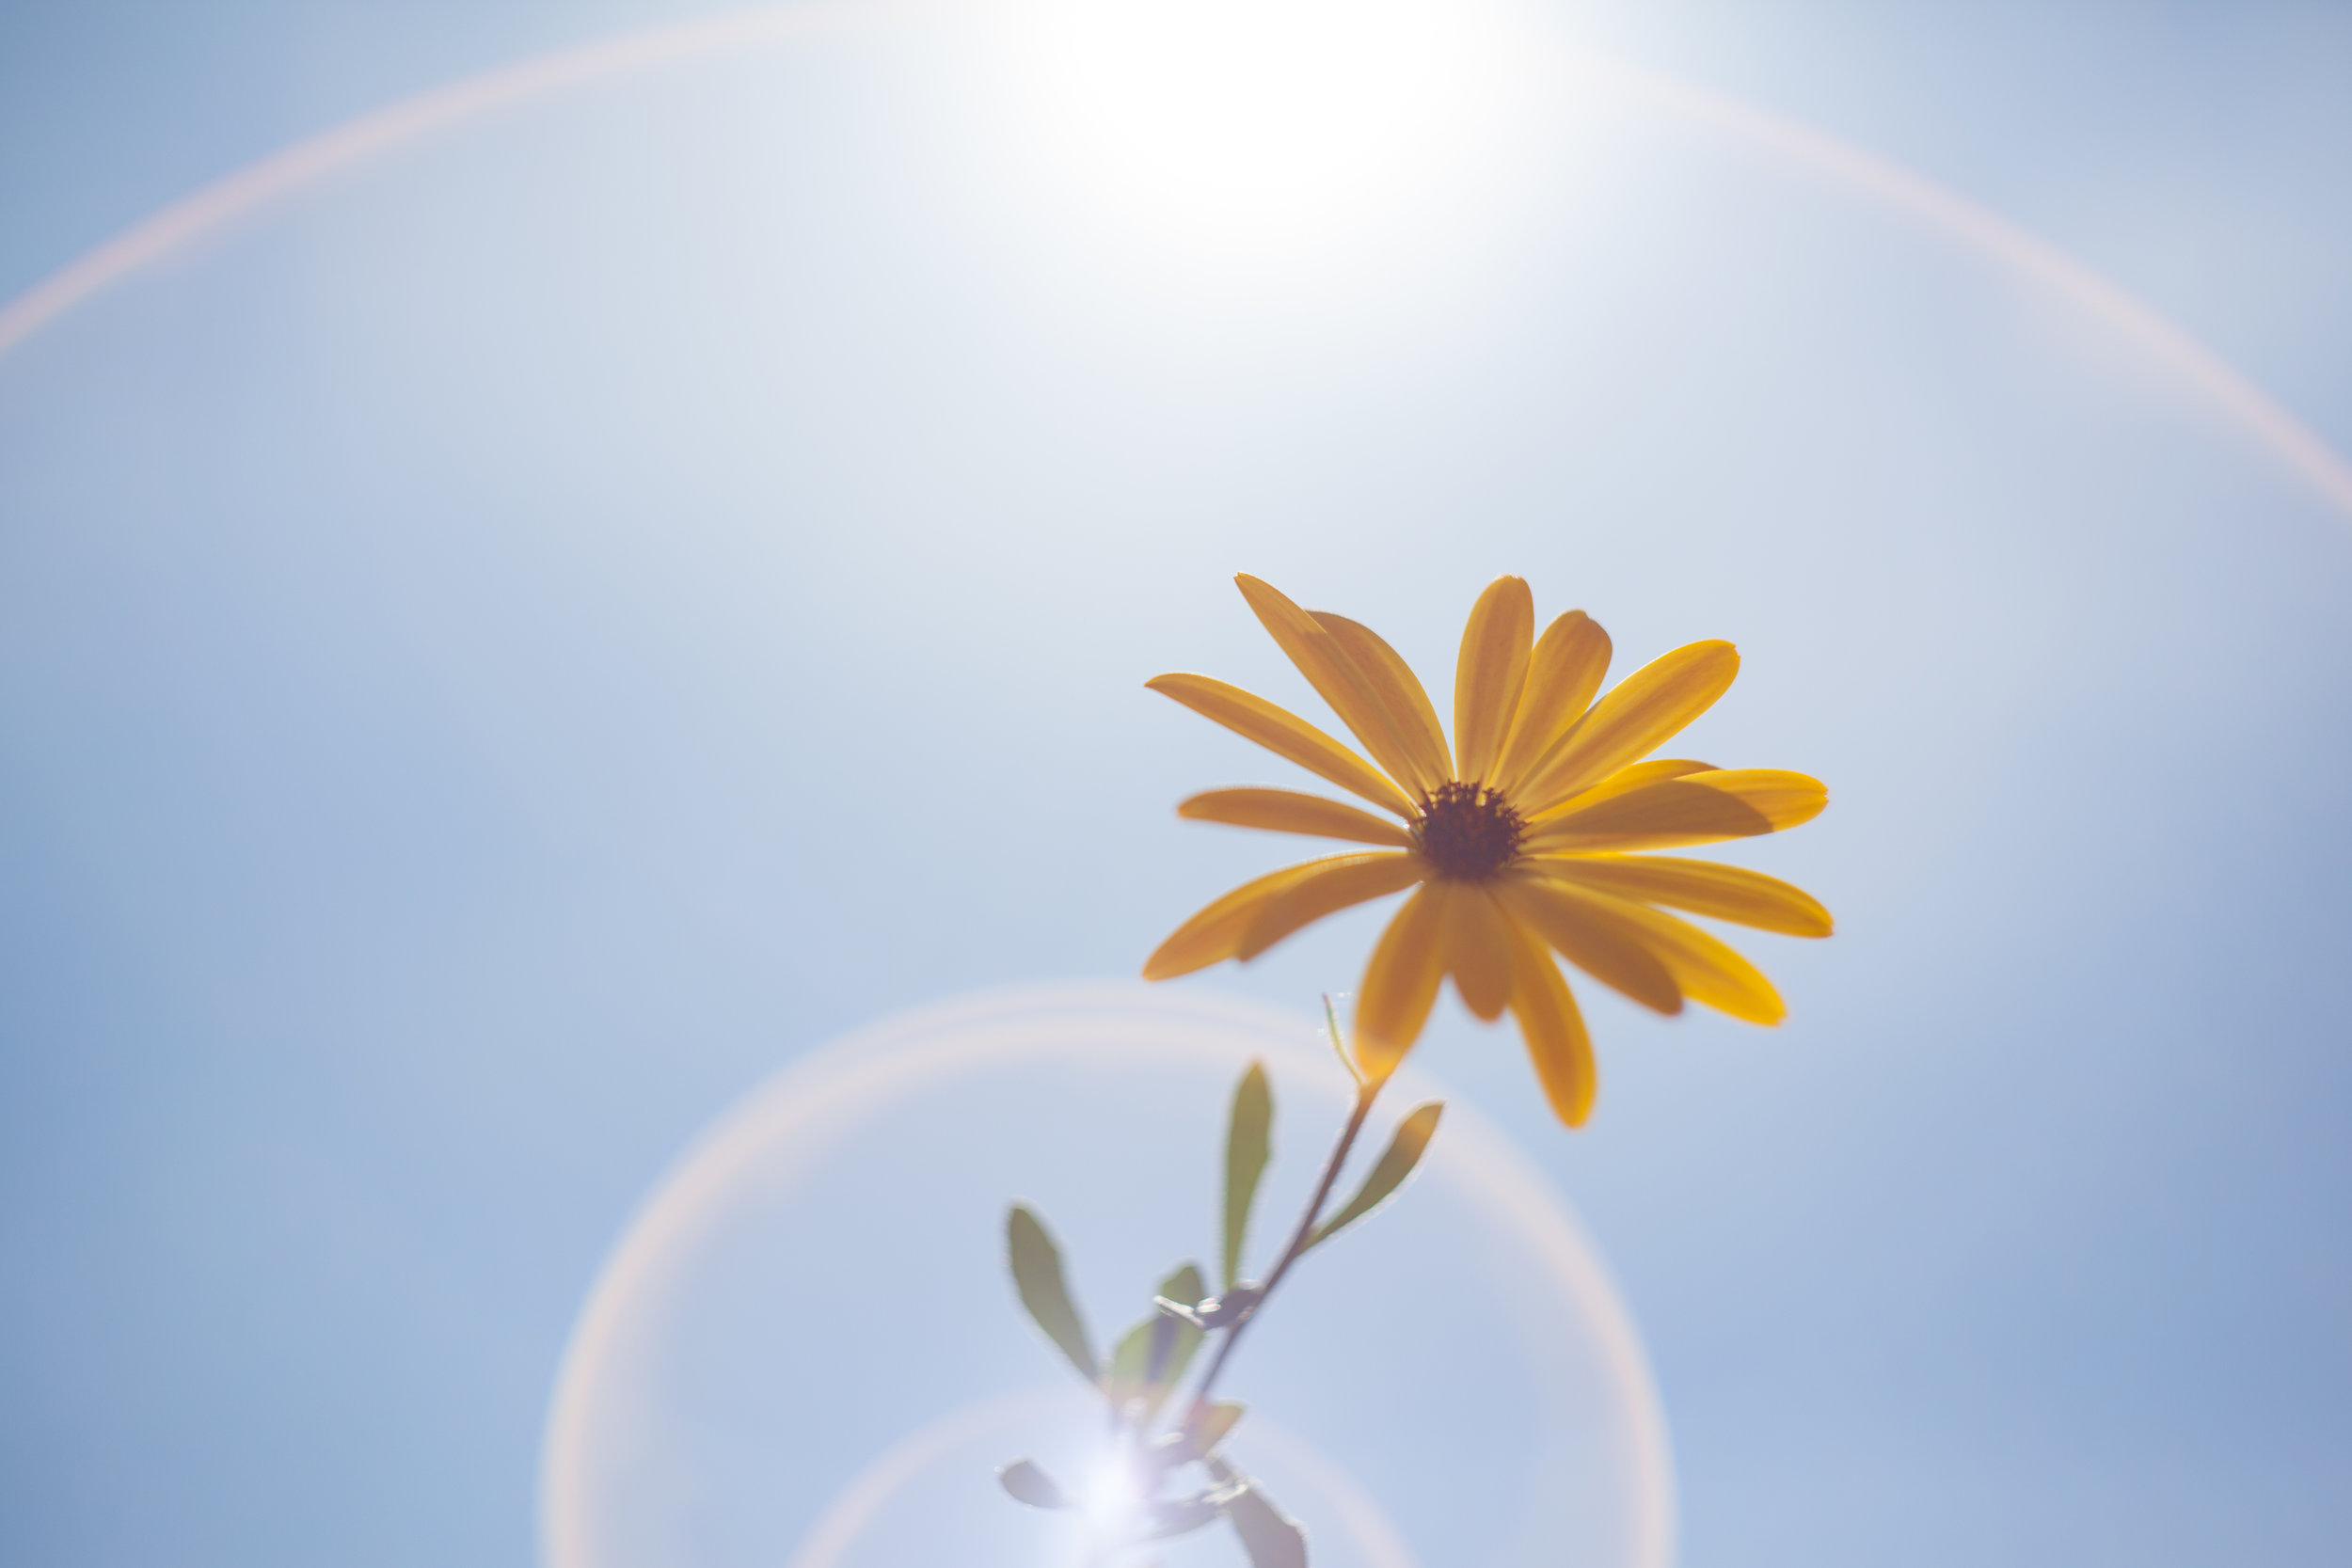 Negative space and flare add elements to the composition of this flower in the summer.